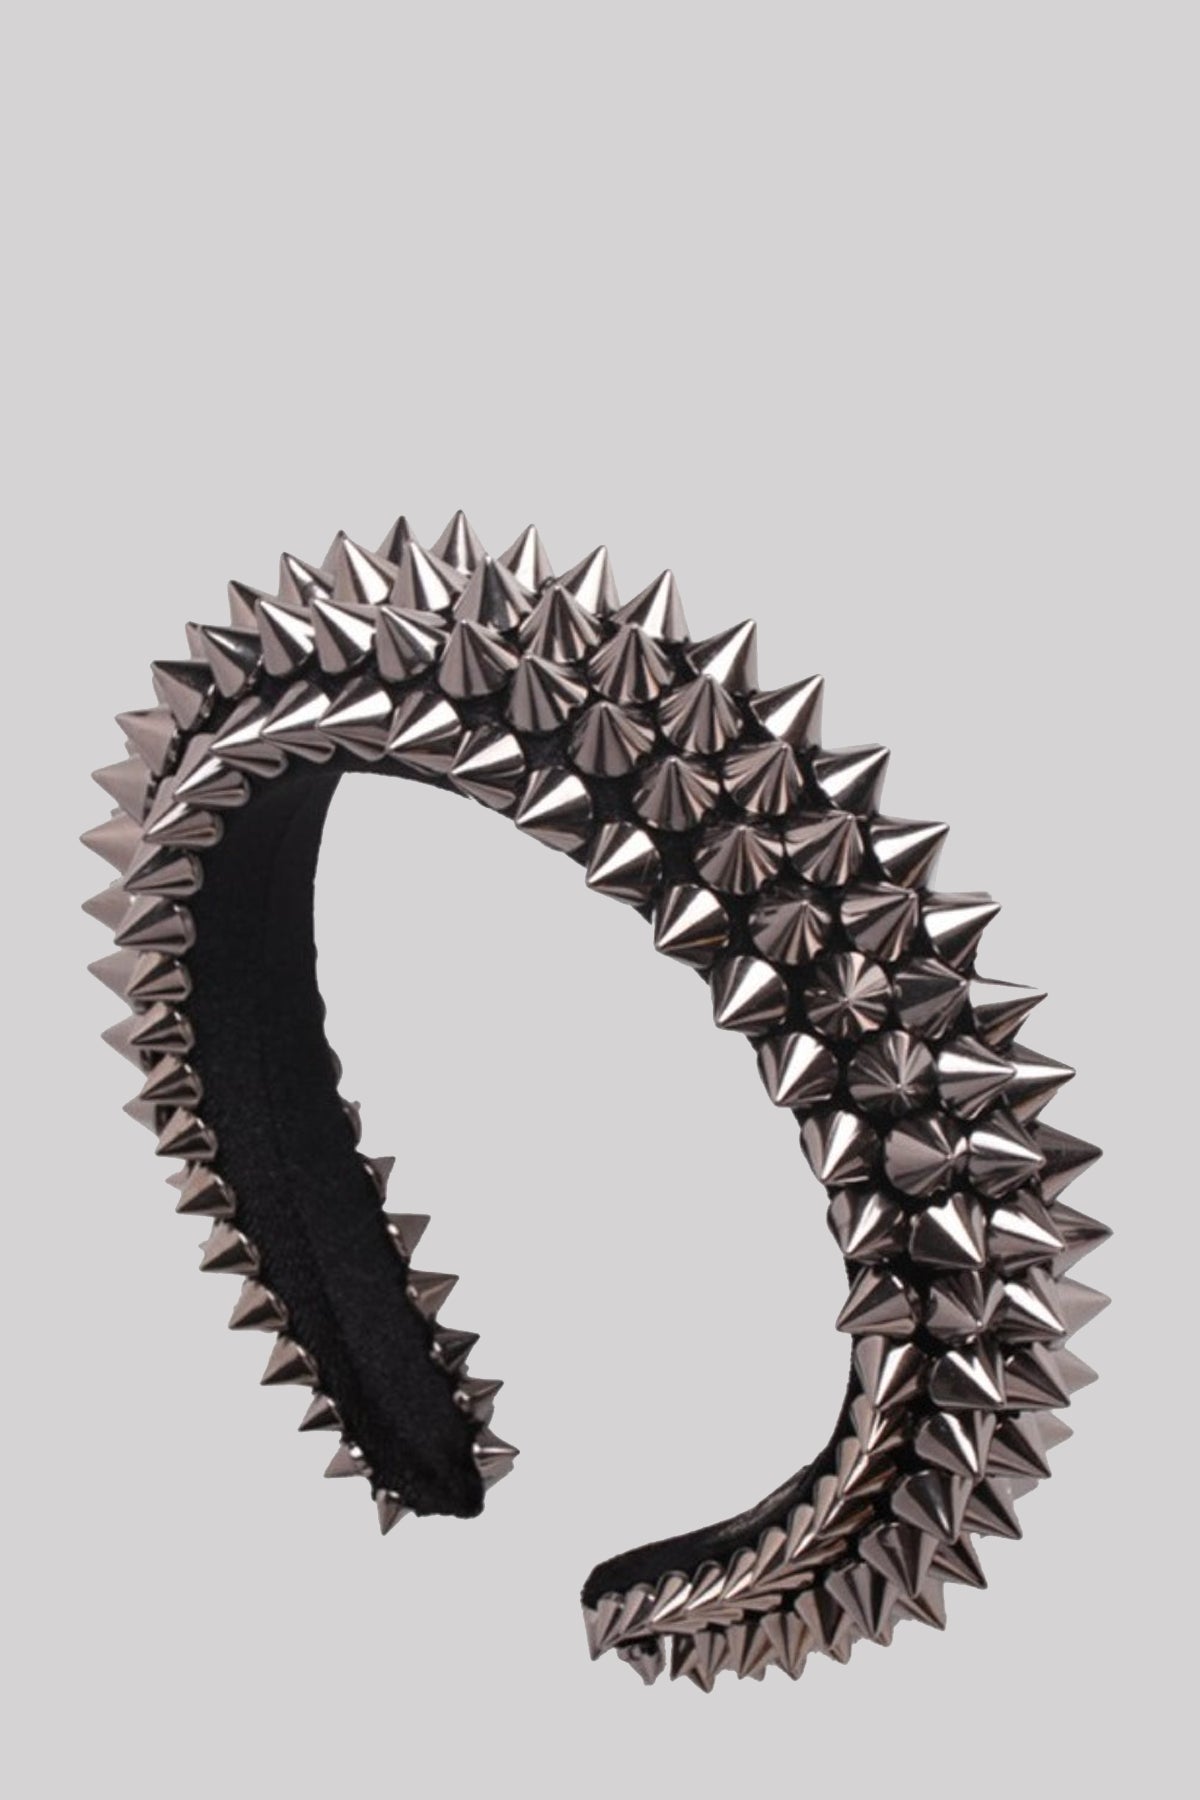 Ro Rox Punk Silver Spiked Studded Gothic Emo Hairband